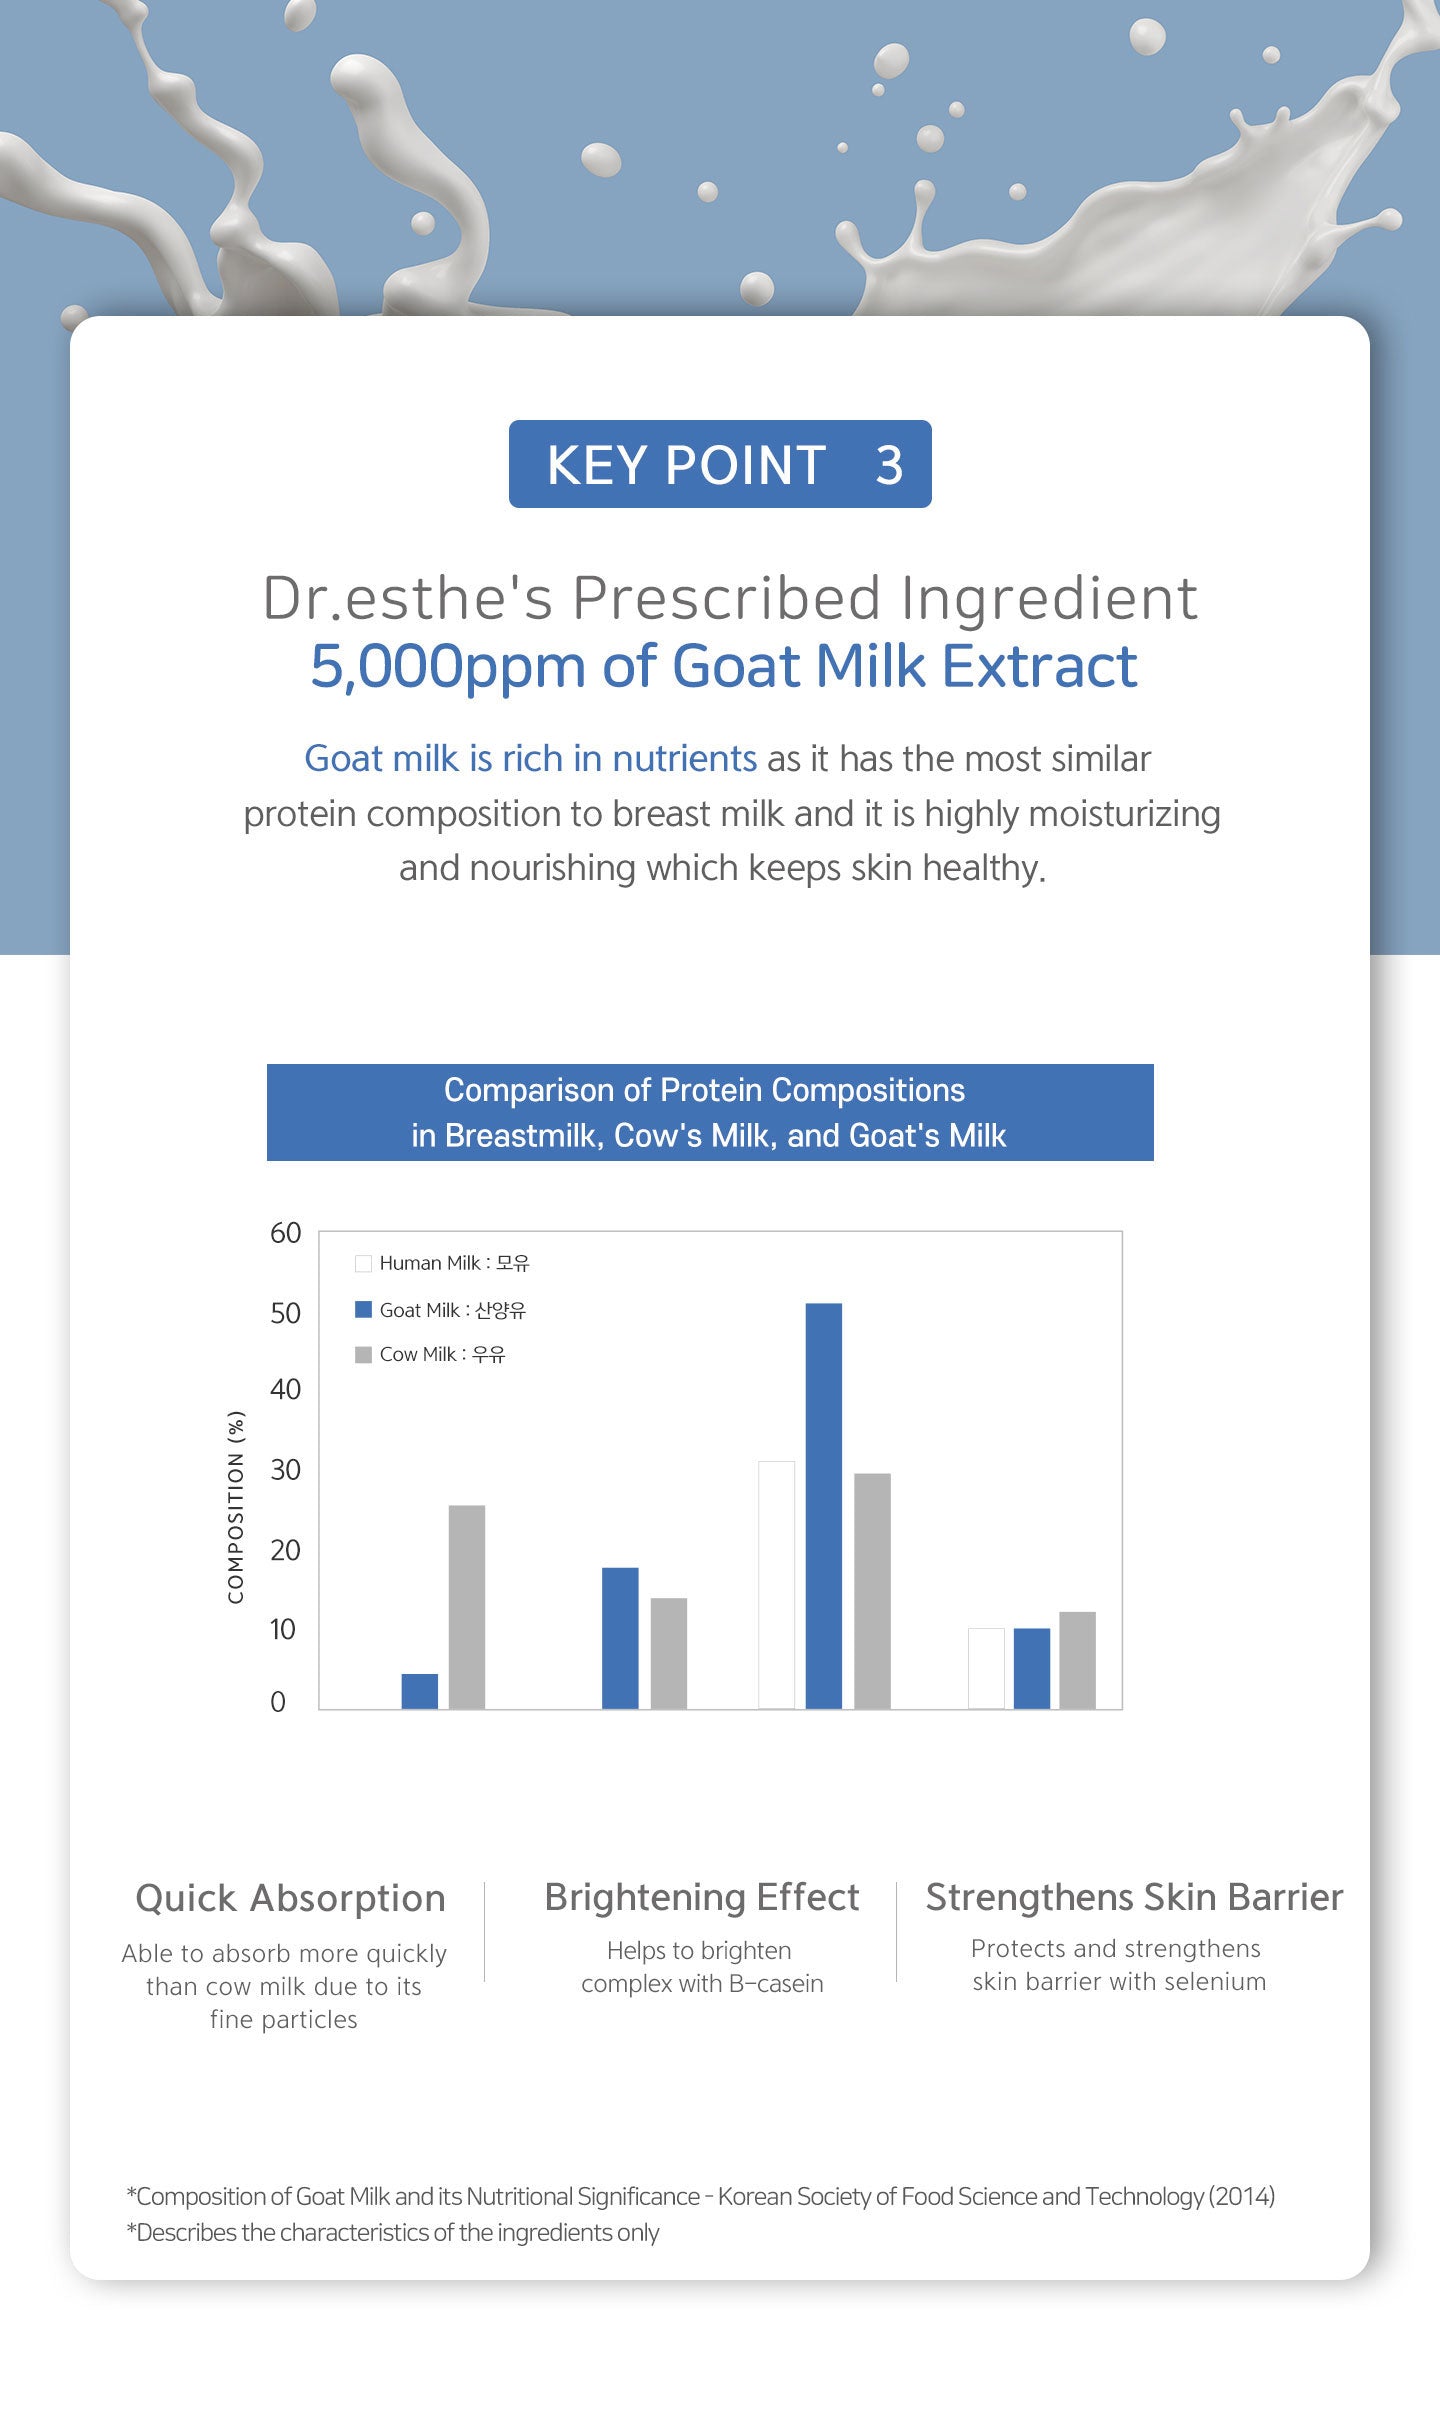 Dr.esthe's prescribed ingredient 5000 ppm of goat milk extract. Goat milk is rich in nutrients as it has the most similar protein composition to breast milk and it is highly moisturizing and nourishing which keeps skin healthy. Quick absorption, brighteni